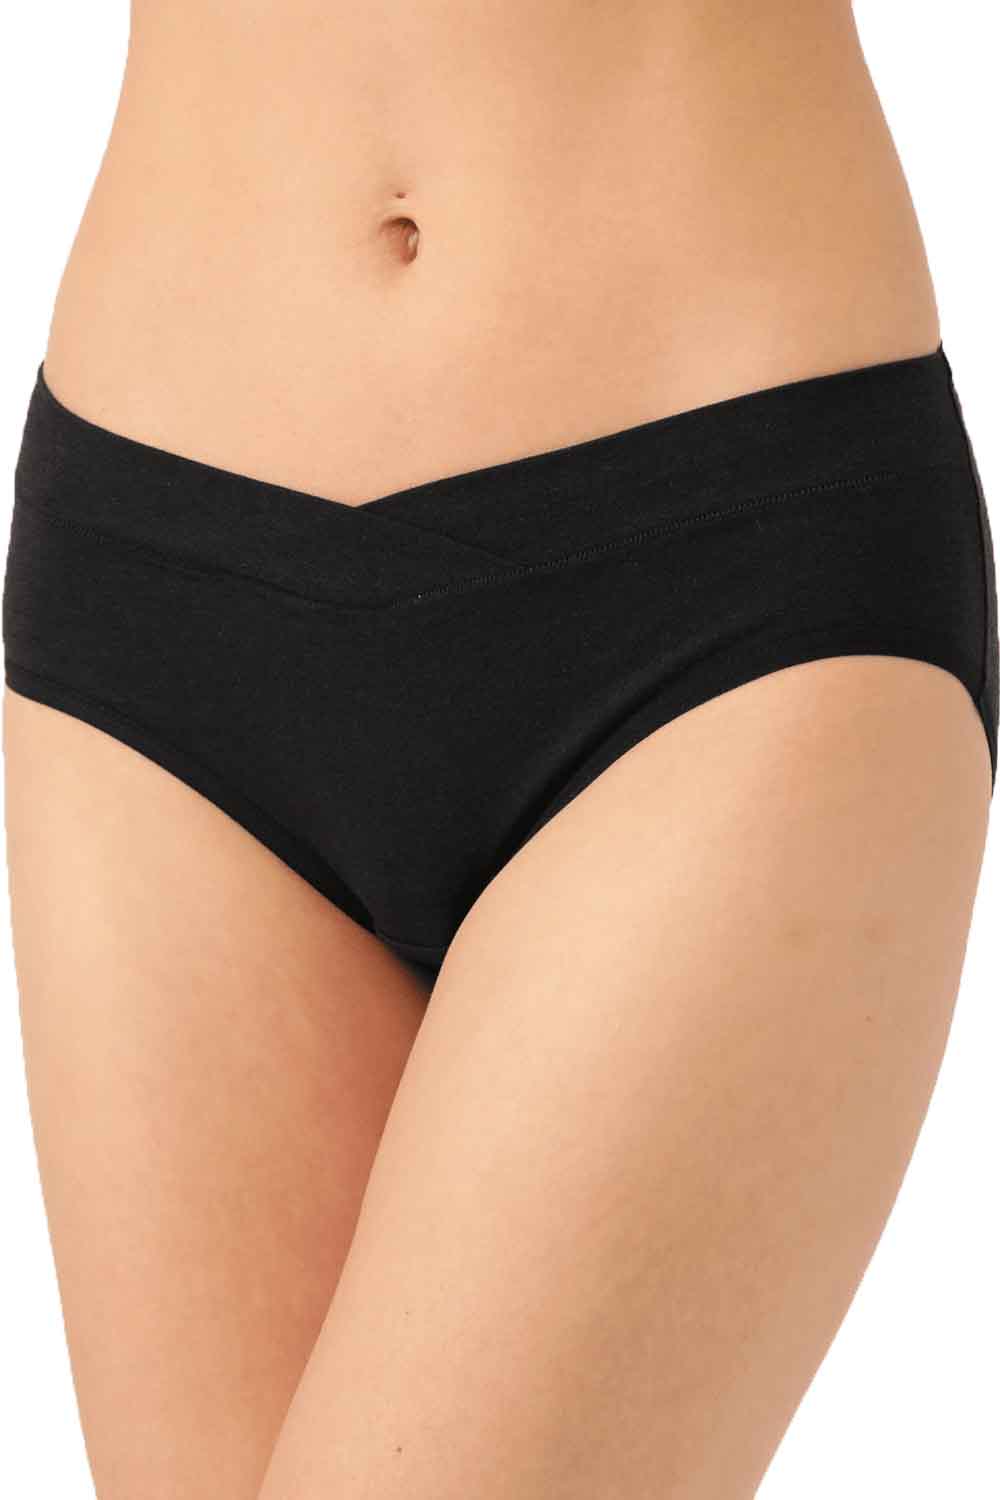 Organic Cotton Antimicrobial Maternity Panty - Pack of 2-IMPC102-Skin_Black-